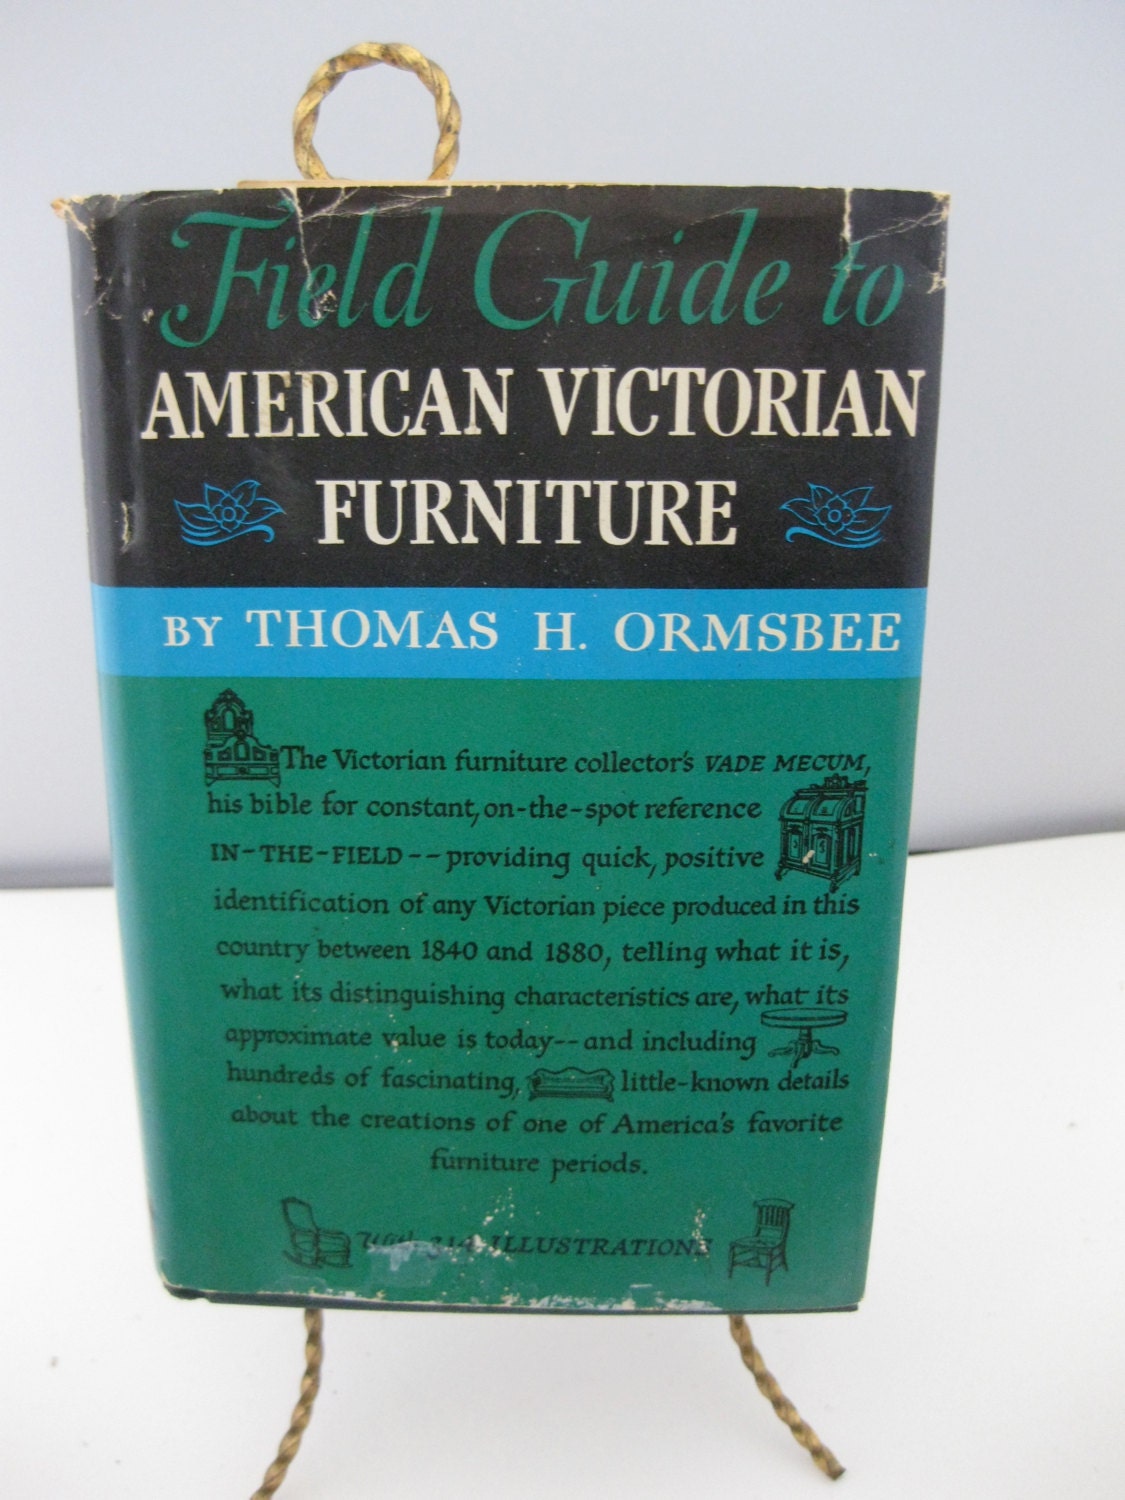 Field Guide to American Victorian Furniture Thomas H. Ormsbee